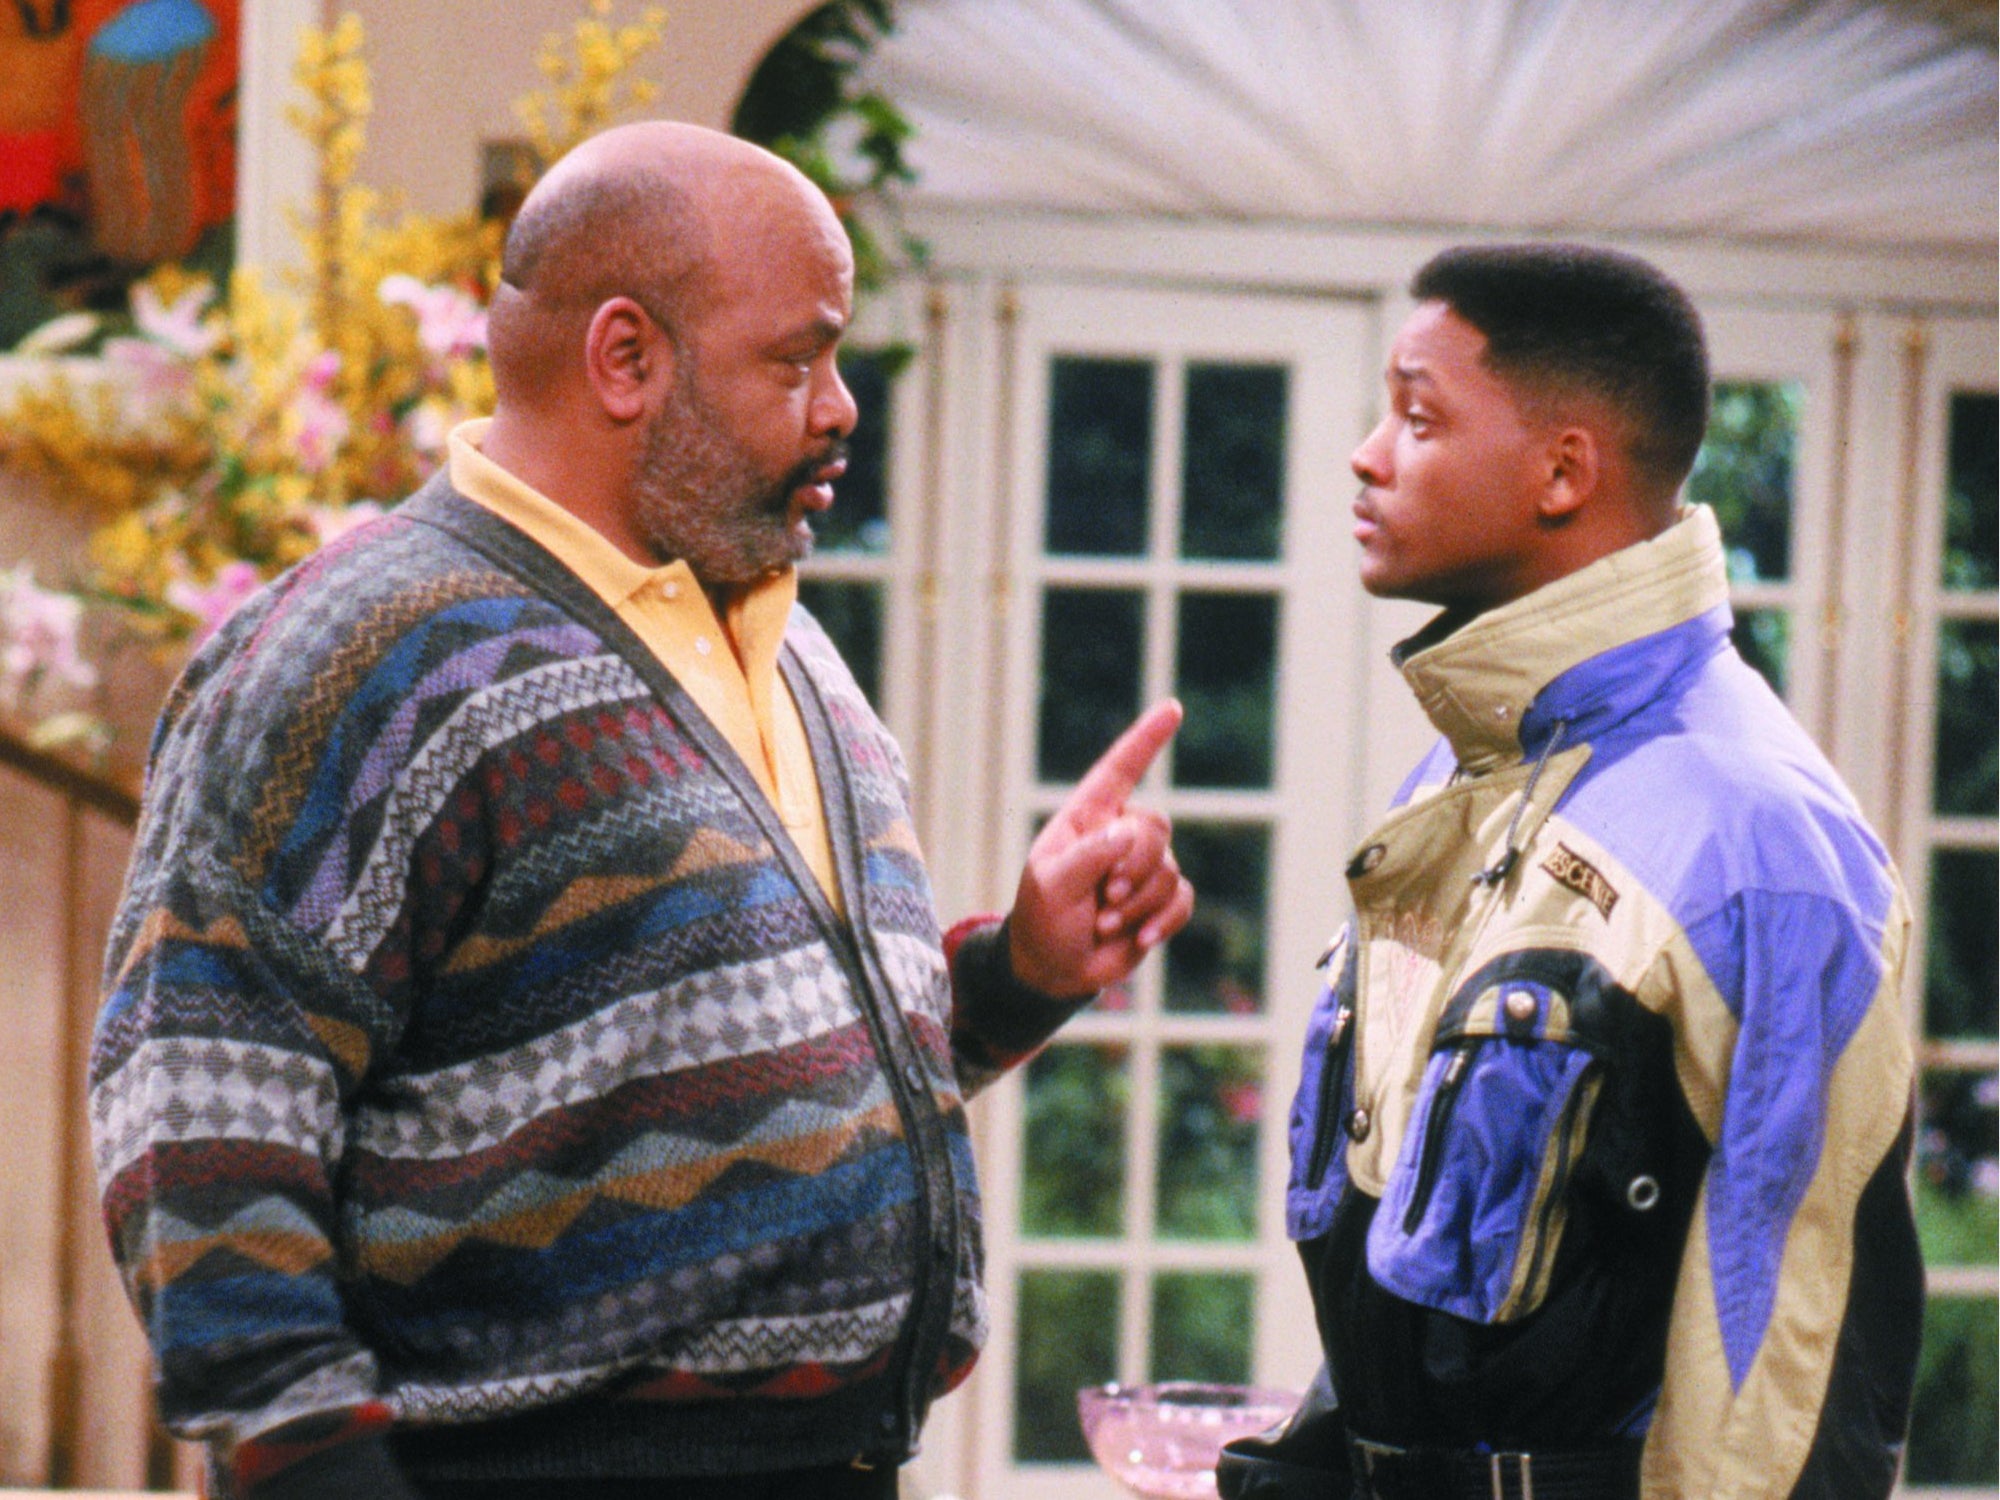 Avery and Smith in ‘The Fresh Prince of Bel-Air'